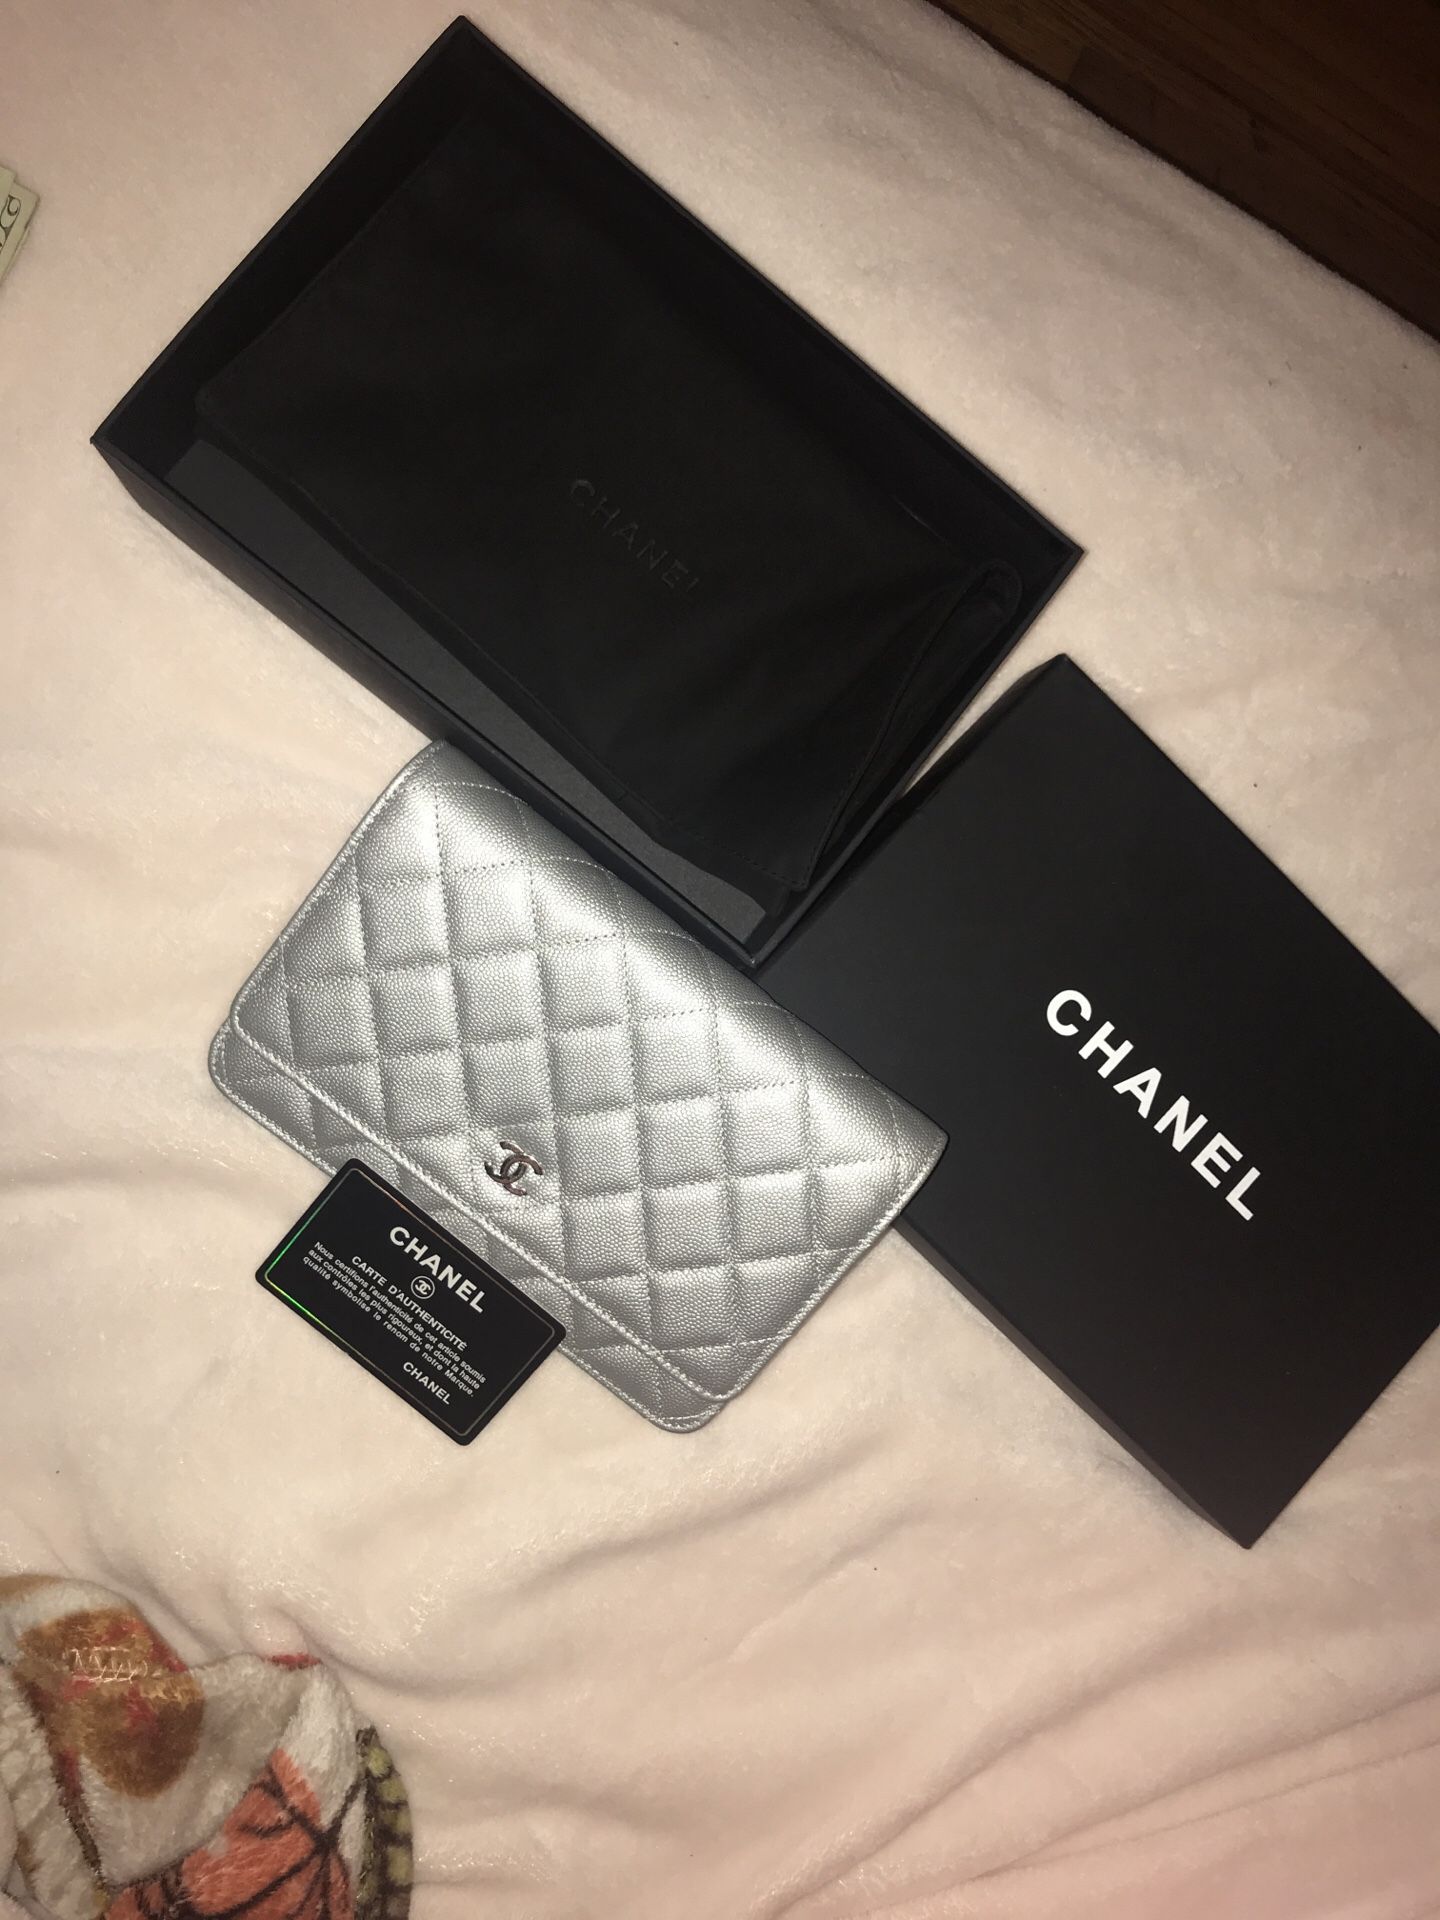 Chanel woc for Sale in San Jose, CA - OfferUp